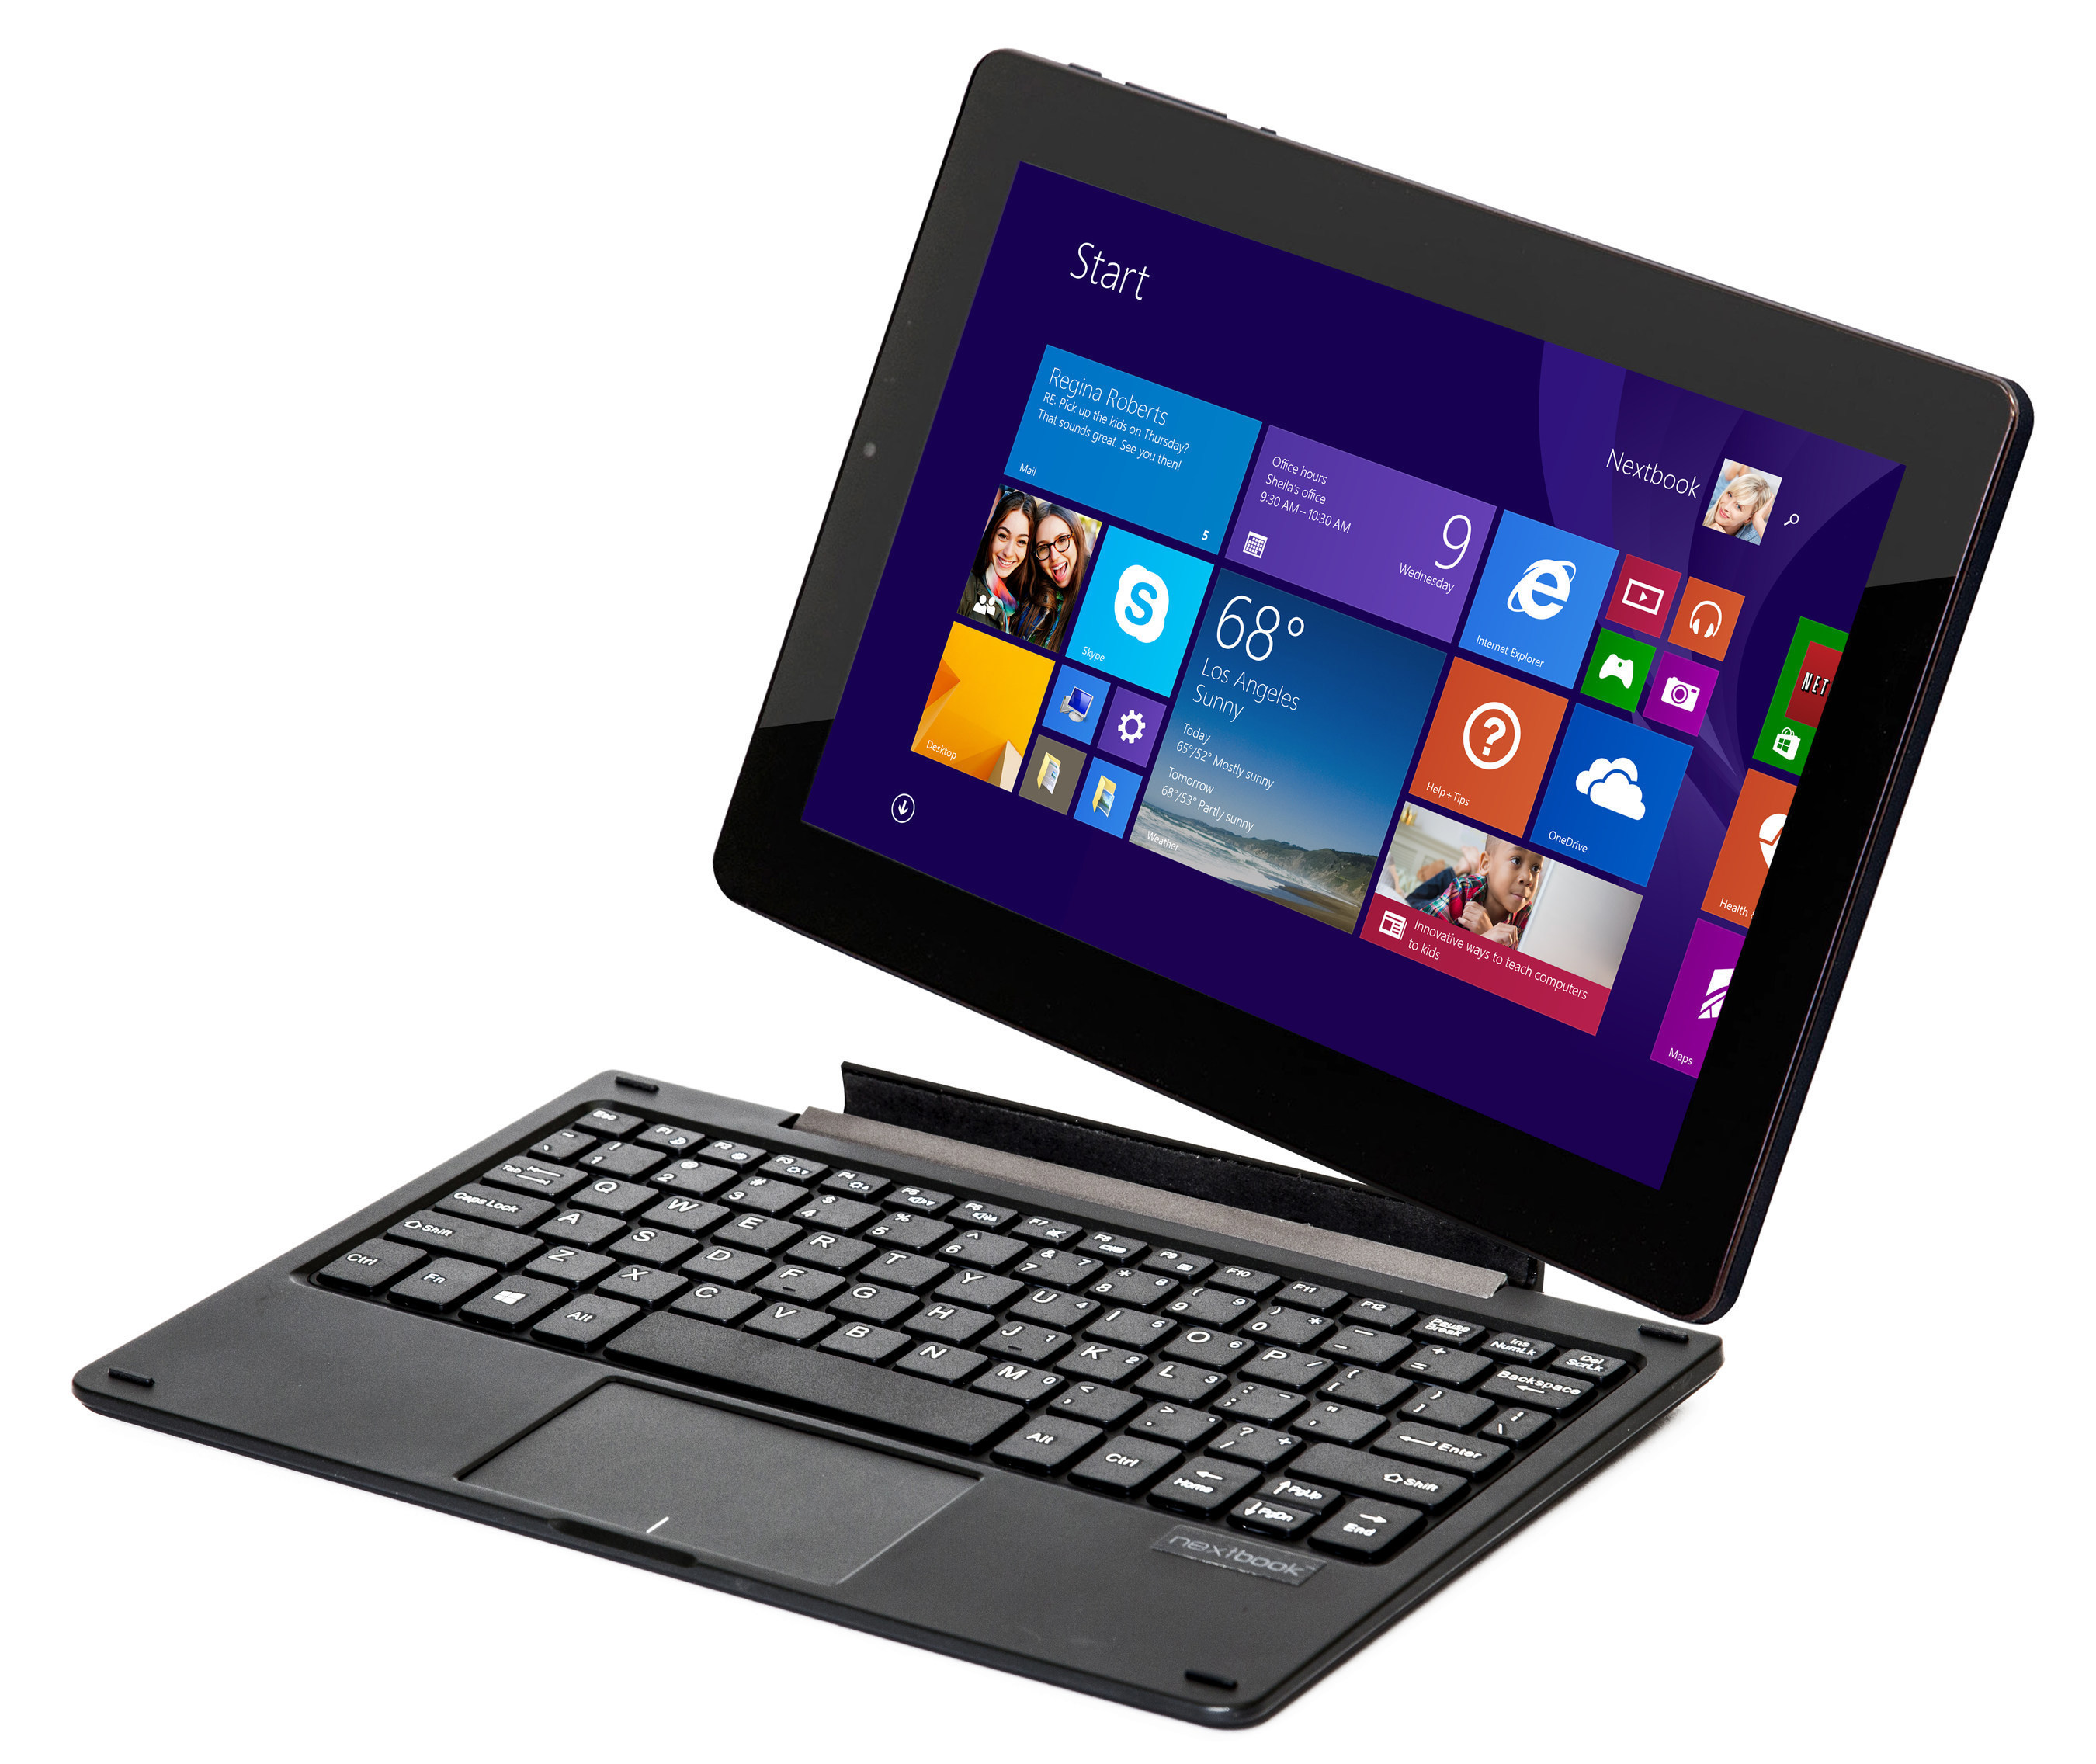 The first Nextbook Windows tablet from E FUN featuring a 10.1" IPS screen and detachable keyboard. Available mid-November at Walmart stores nationwide and Walmart.com for $179.